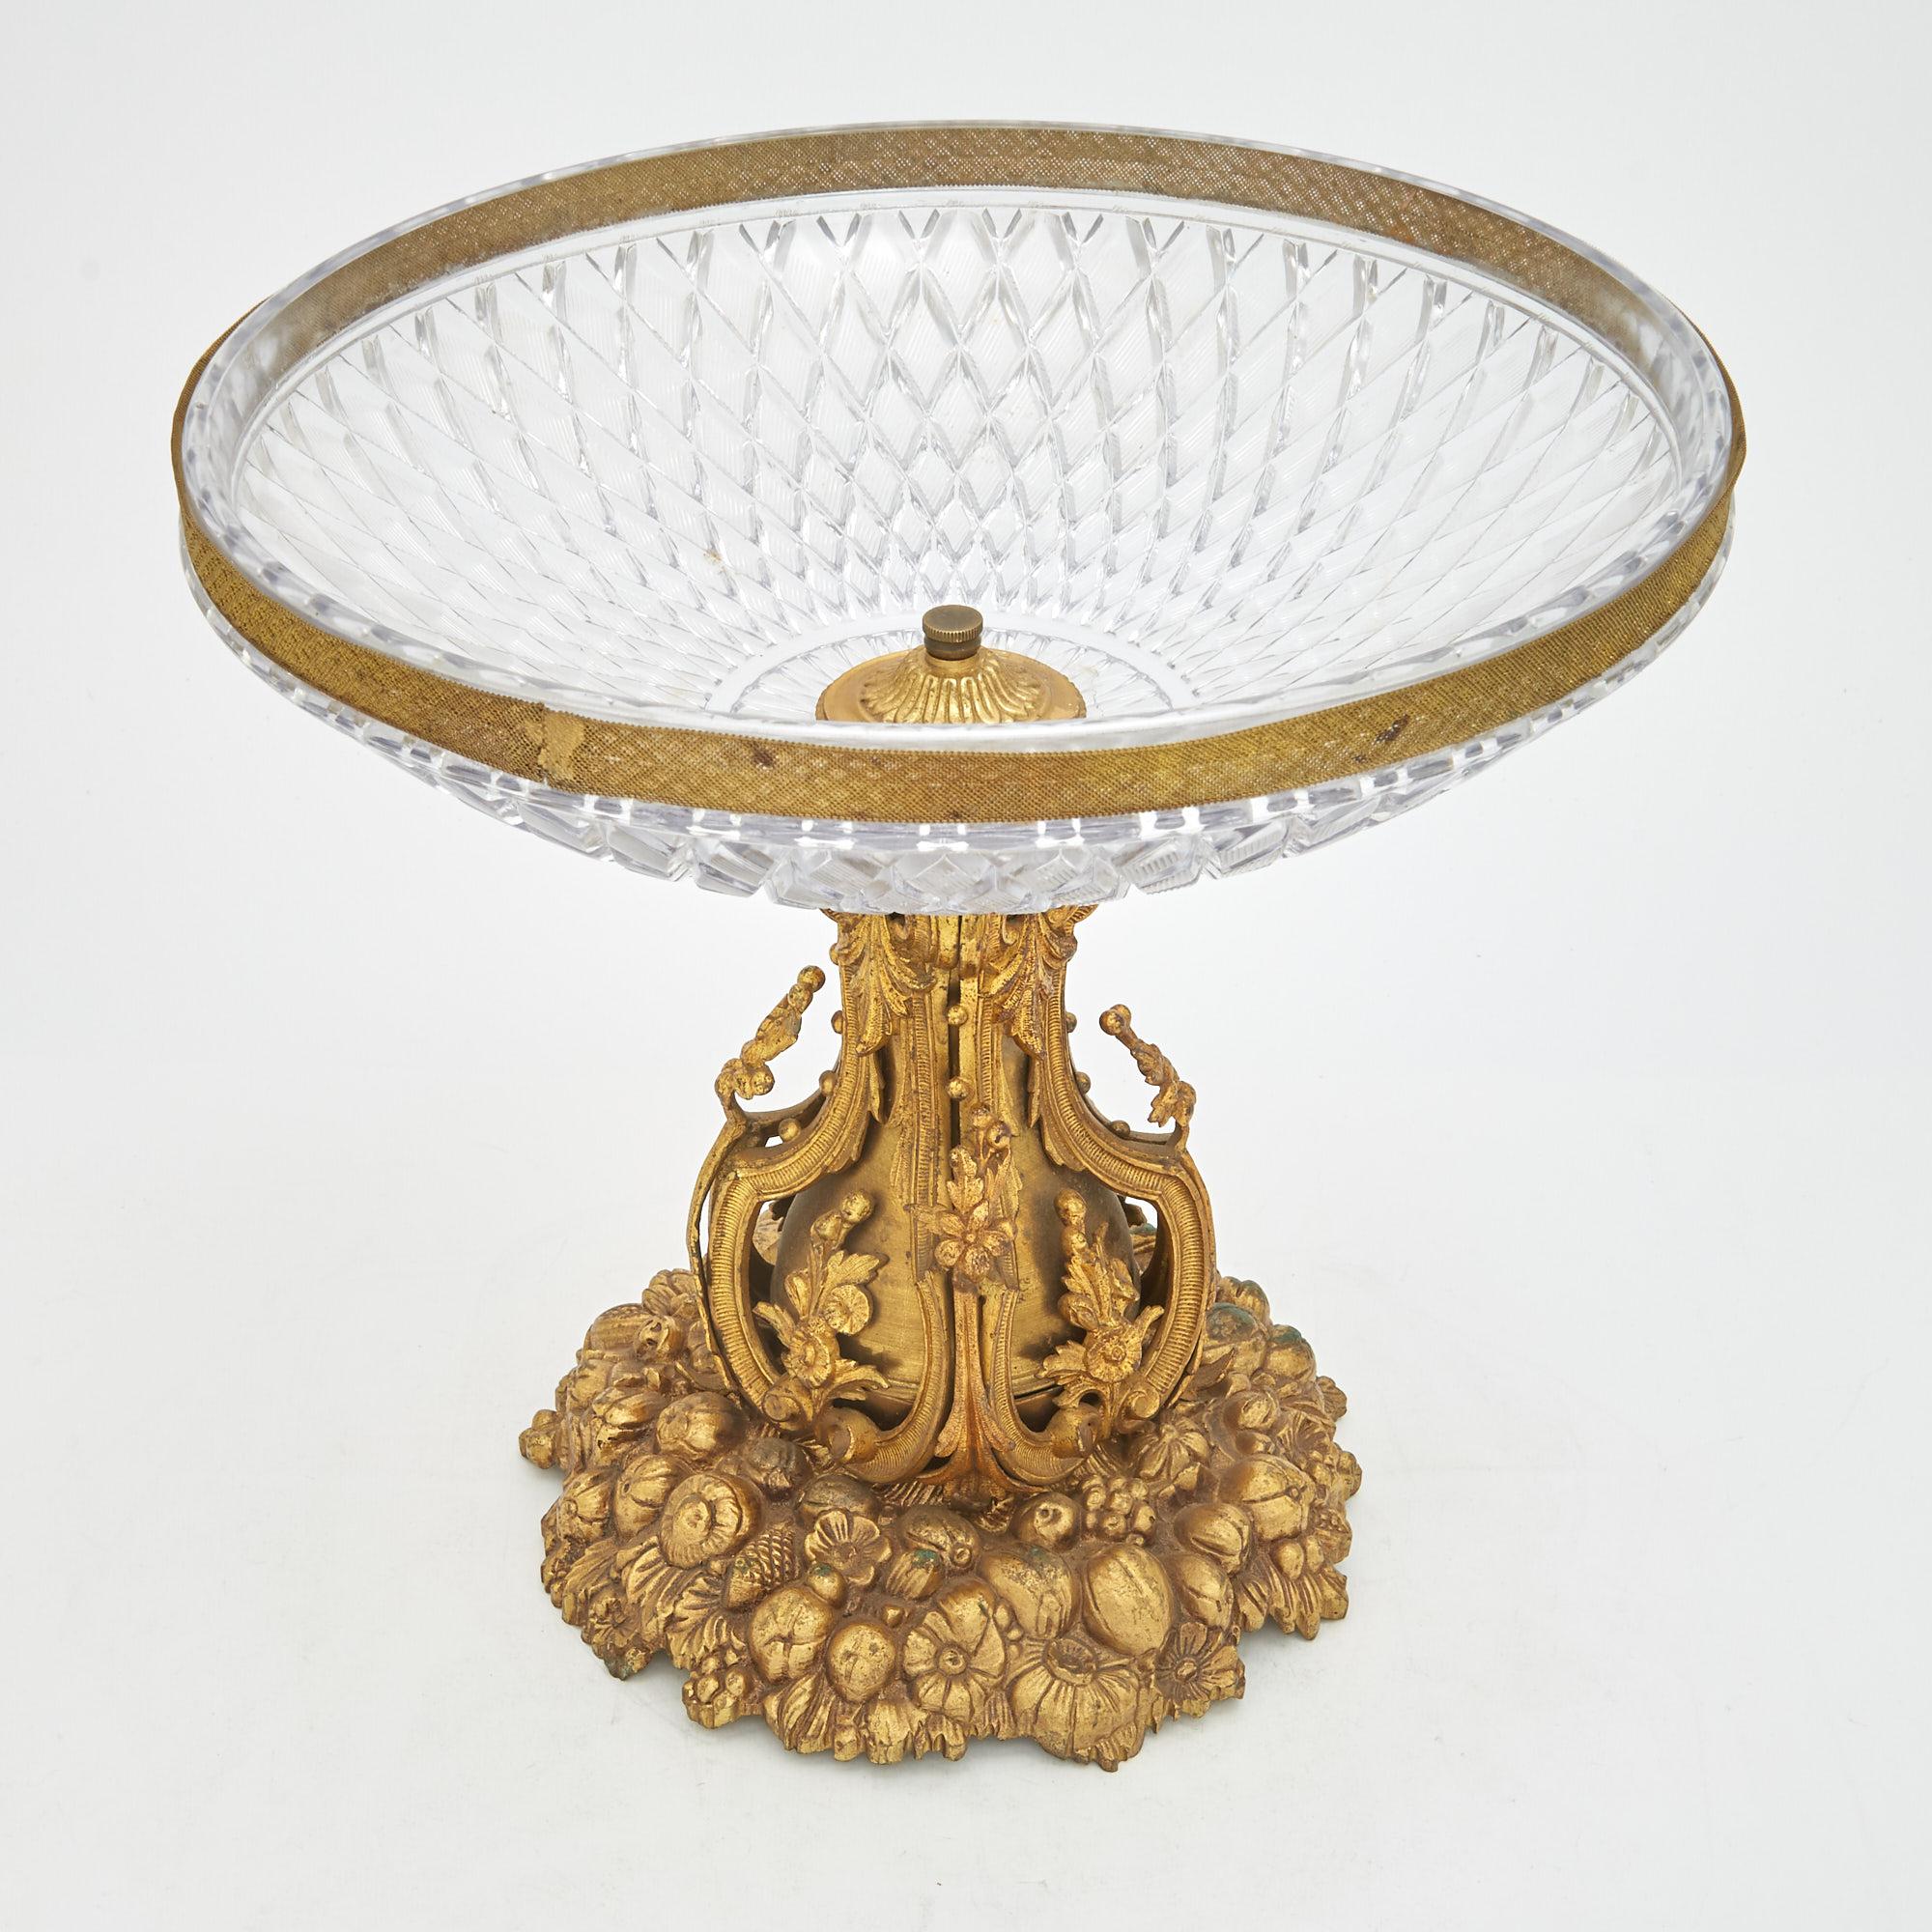 Transport yourself to the grandeur of the 19th century with this exquisite Napoleon III tableware centerpiece. Crafted with meticulous attention to detail, this centerpiece is a harmonious blend of gilt bronze ormolu and molded glass, epitomizing